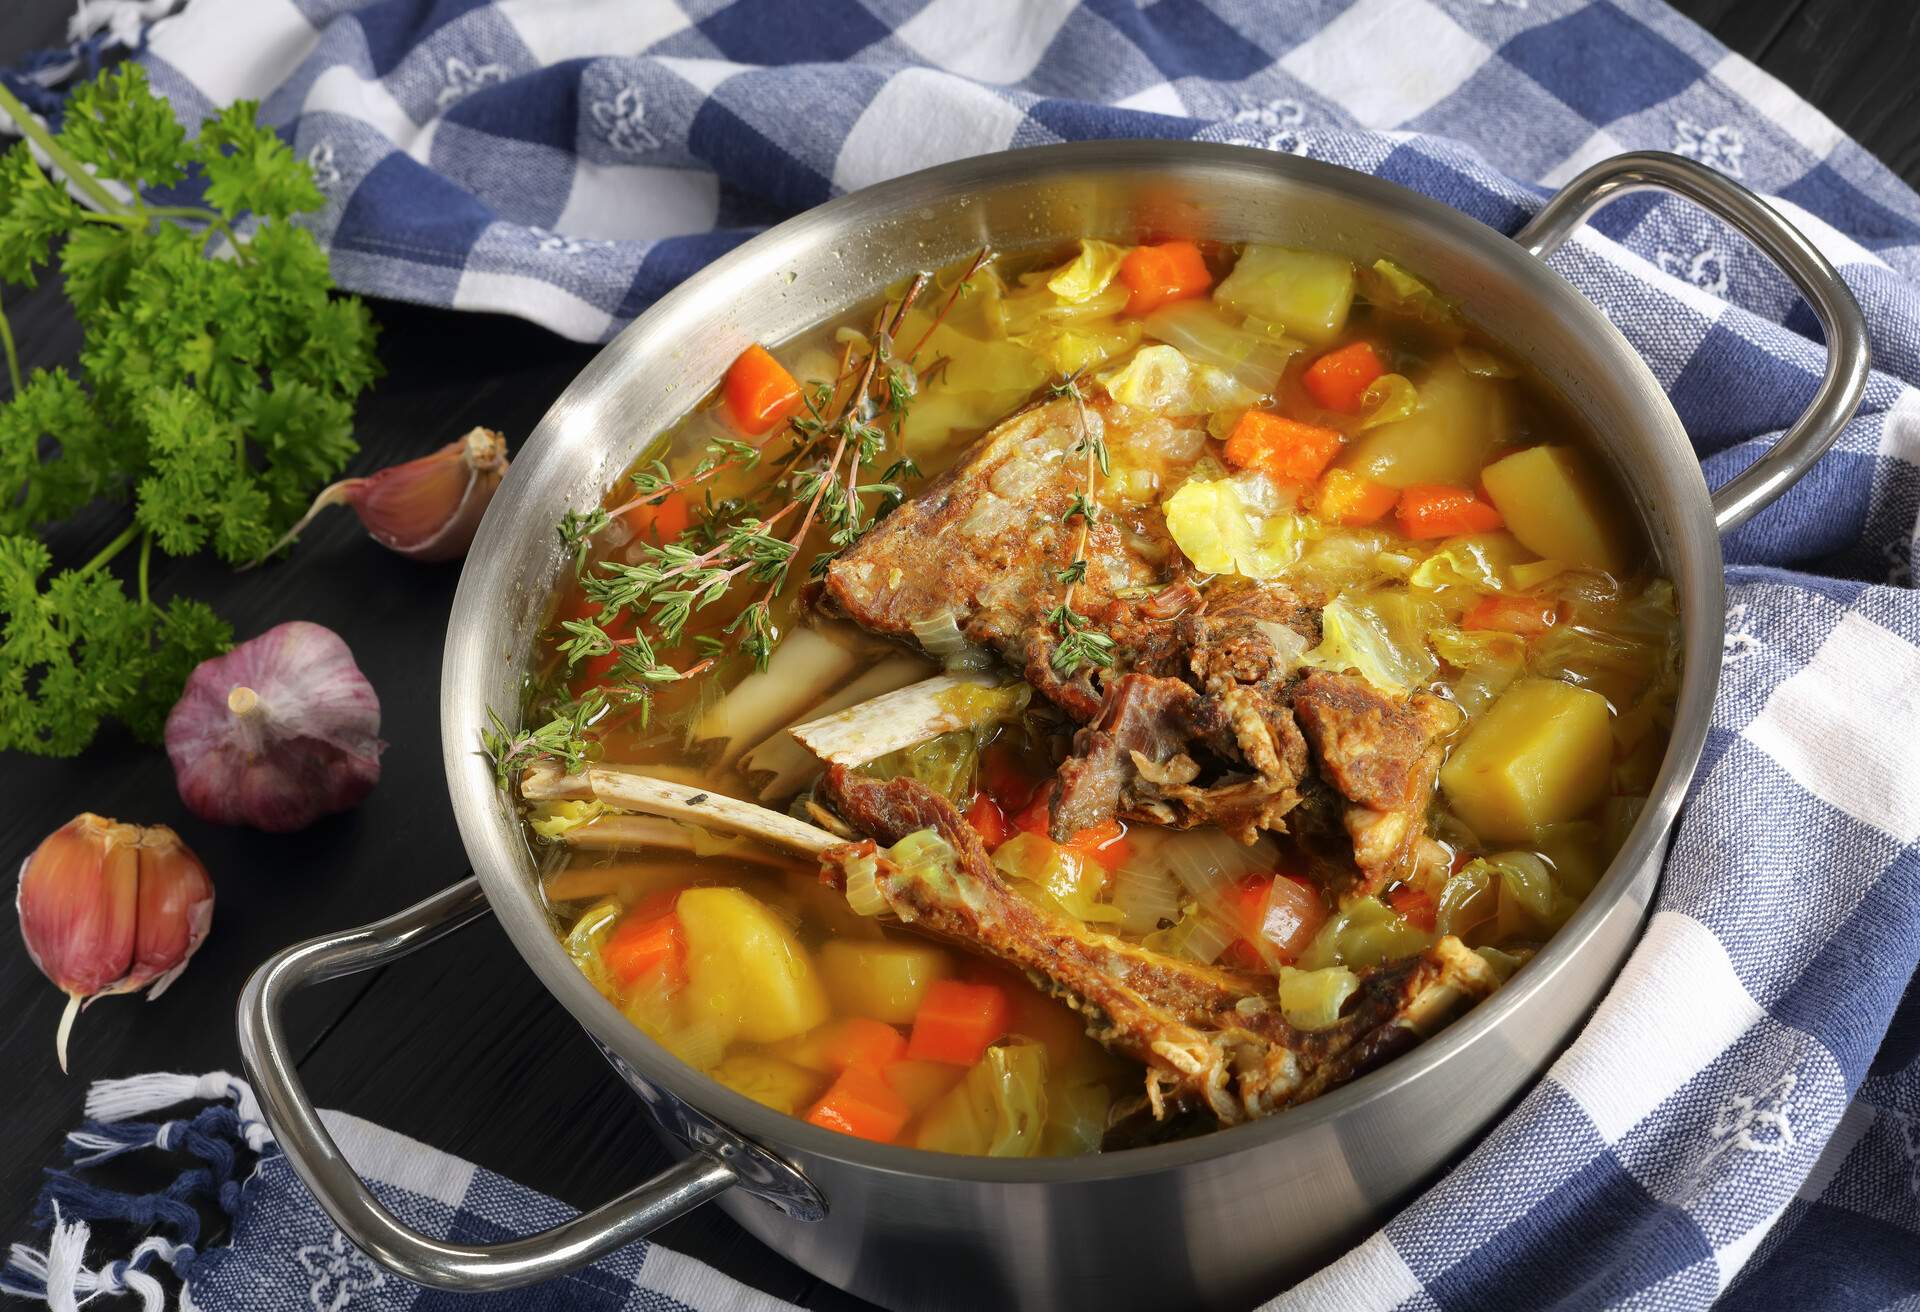 delicious Icelandic Lamb winter hot Soup with vegetables and spices or kjotsupa in a stainless steel casserole pan on wooden table with kitchen towel, traditional recipe, view from above, close-up